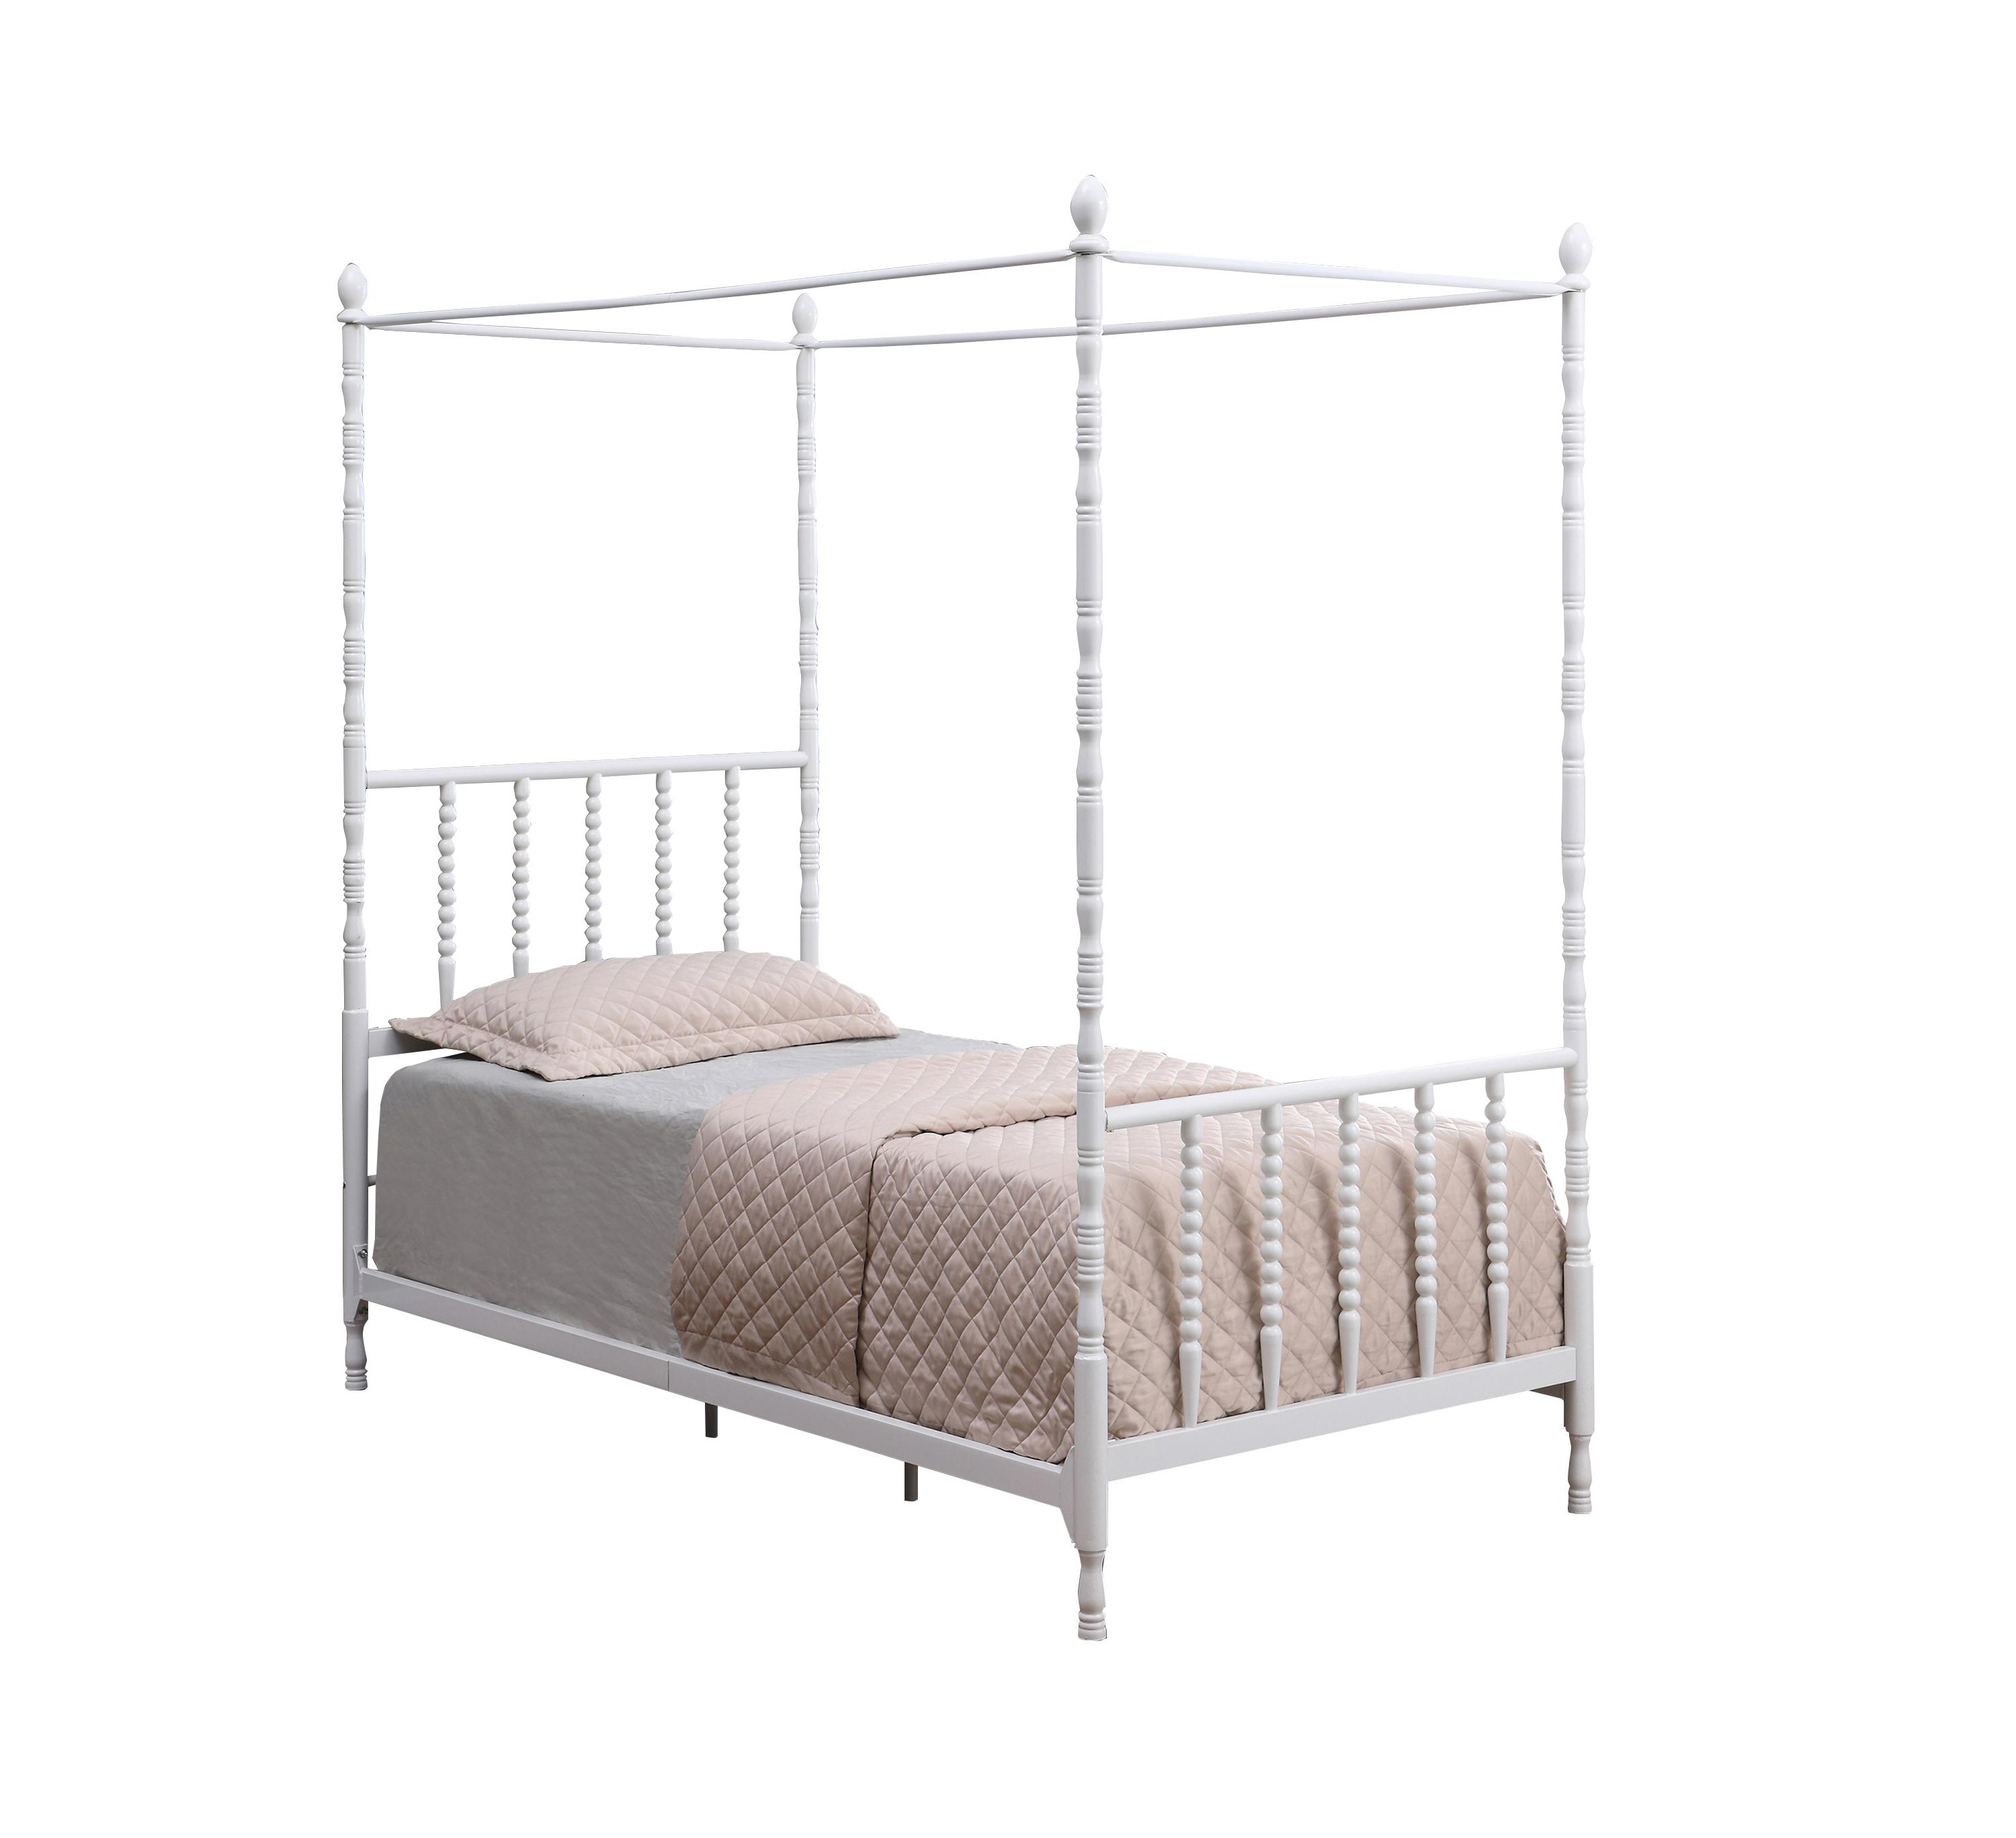 Transitional Bed 406055T Betony 406055T in White 